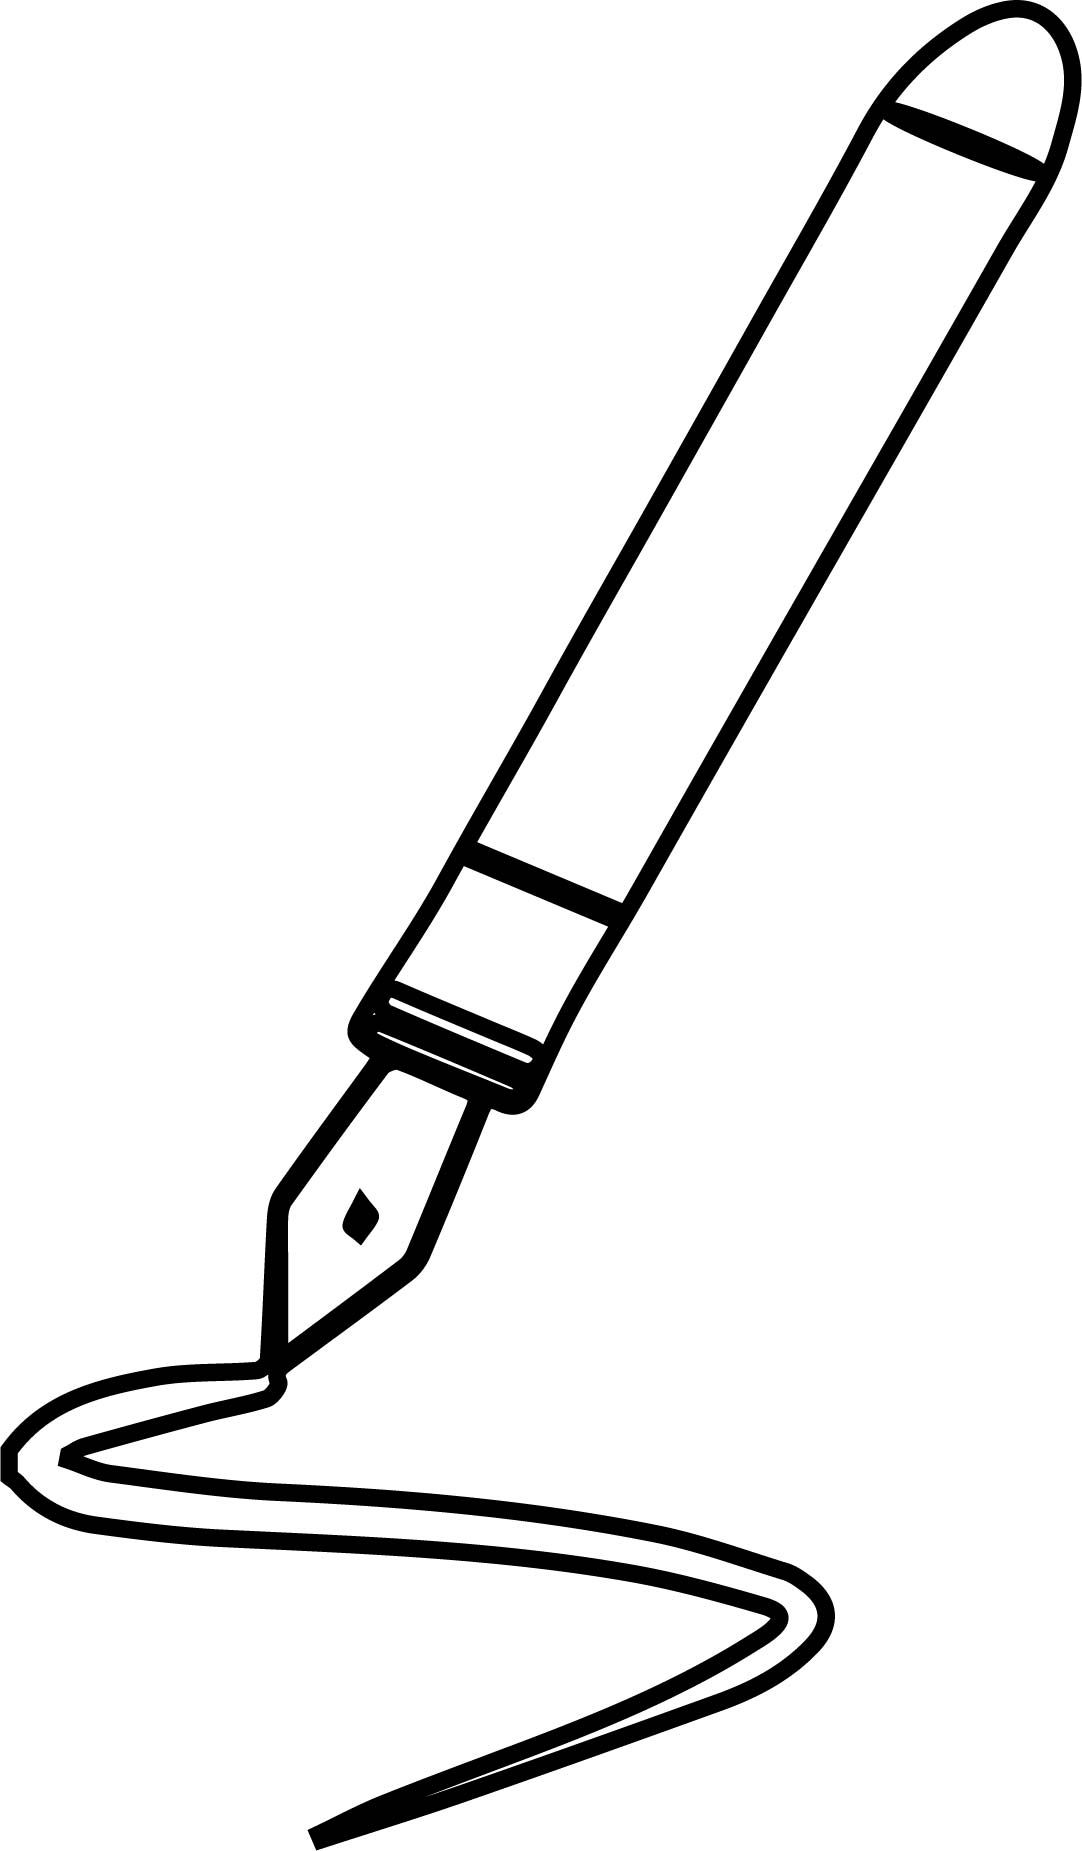 Pen Coloring Pages - Coloring Home